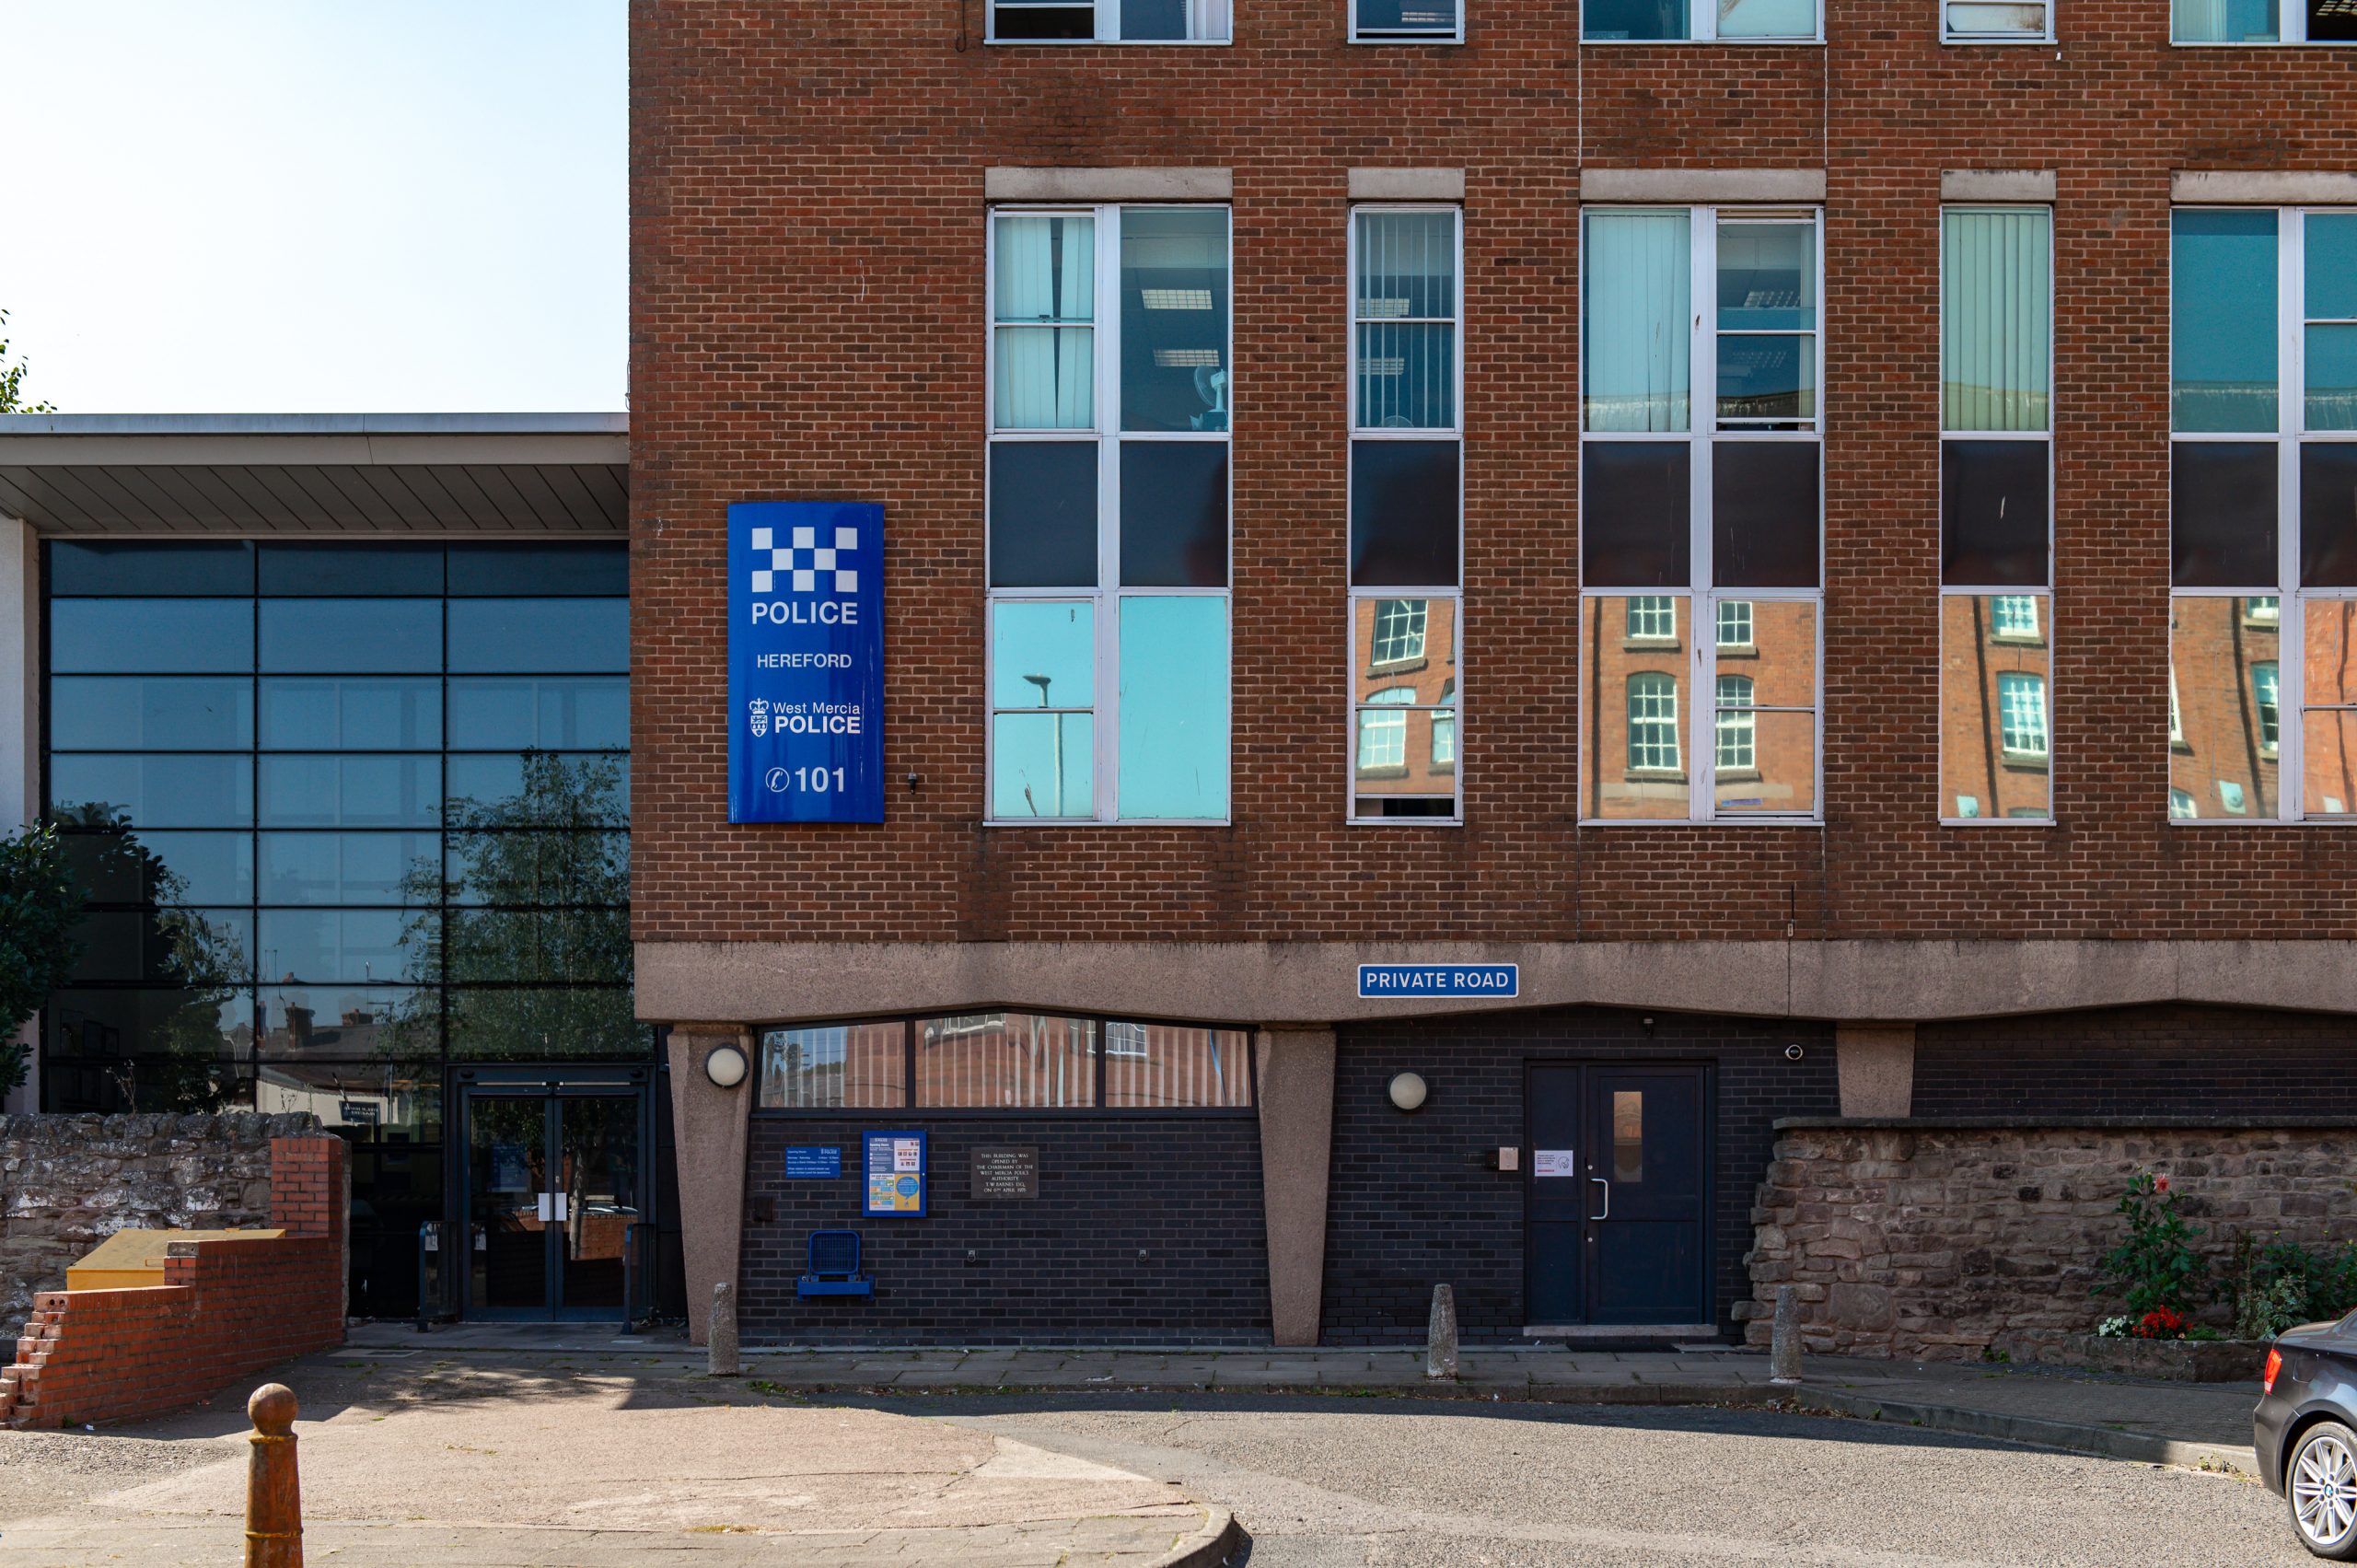 HAVE YOUR SAY! | It’s your chance to have your say on proposed changes to front counter services at Hereford Police Station